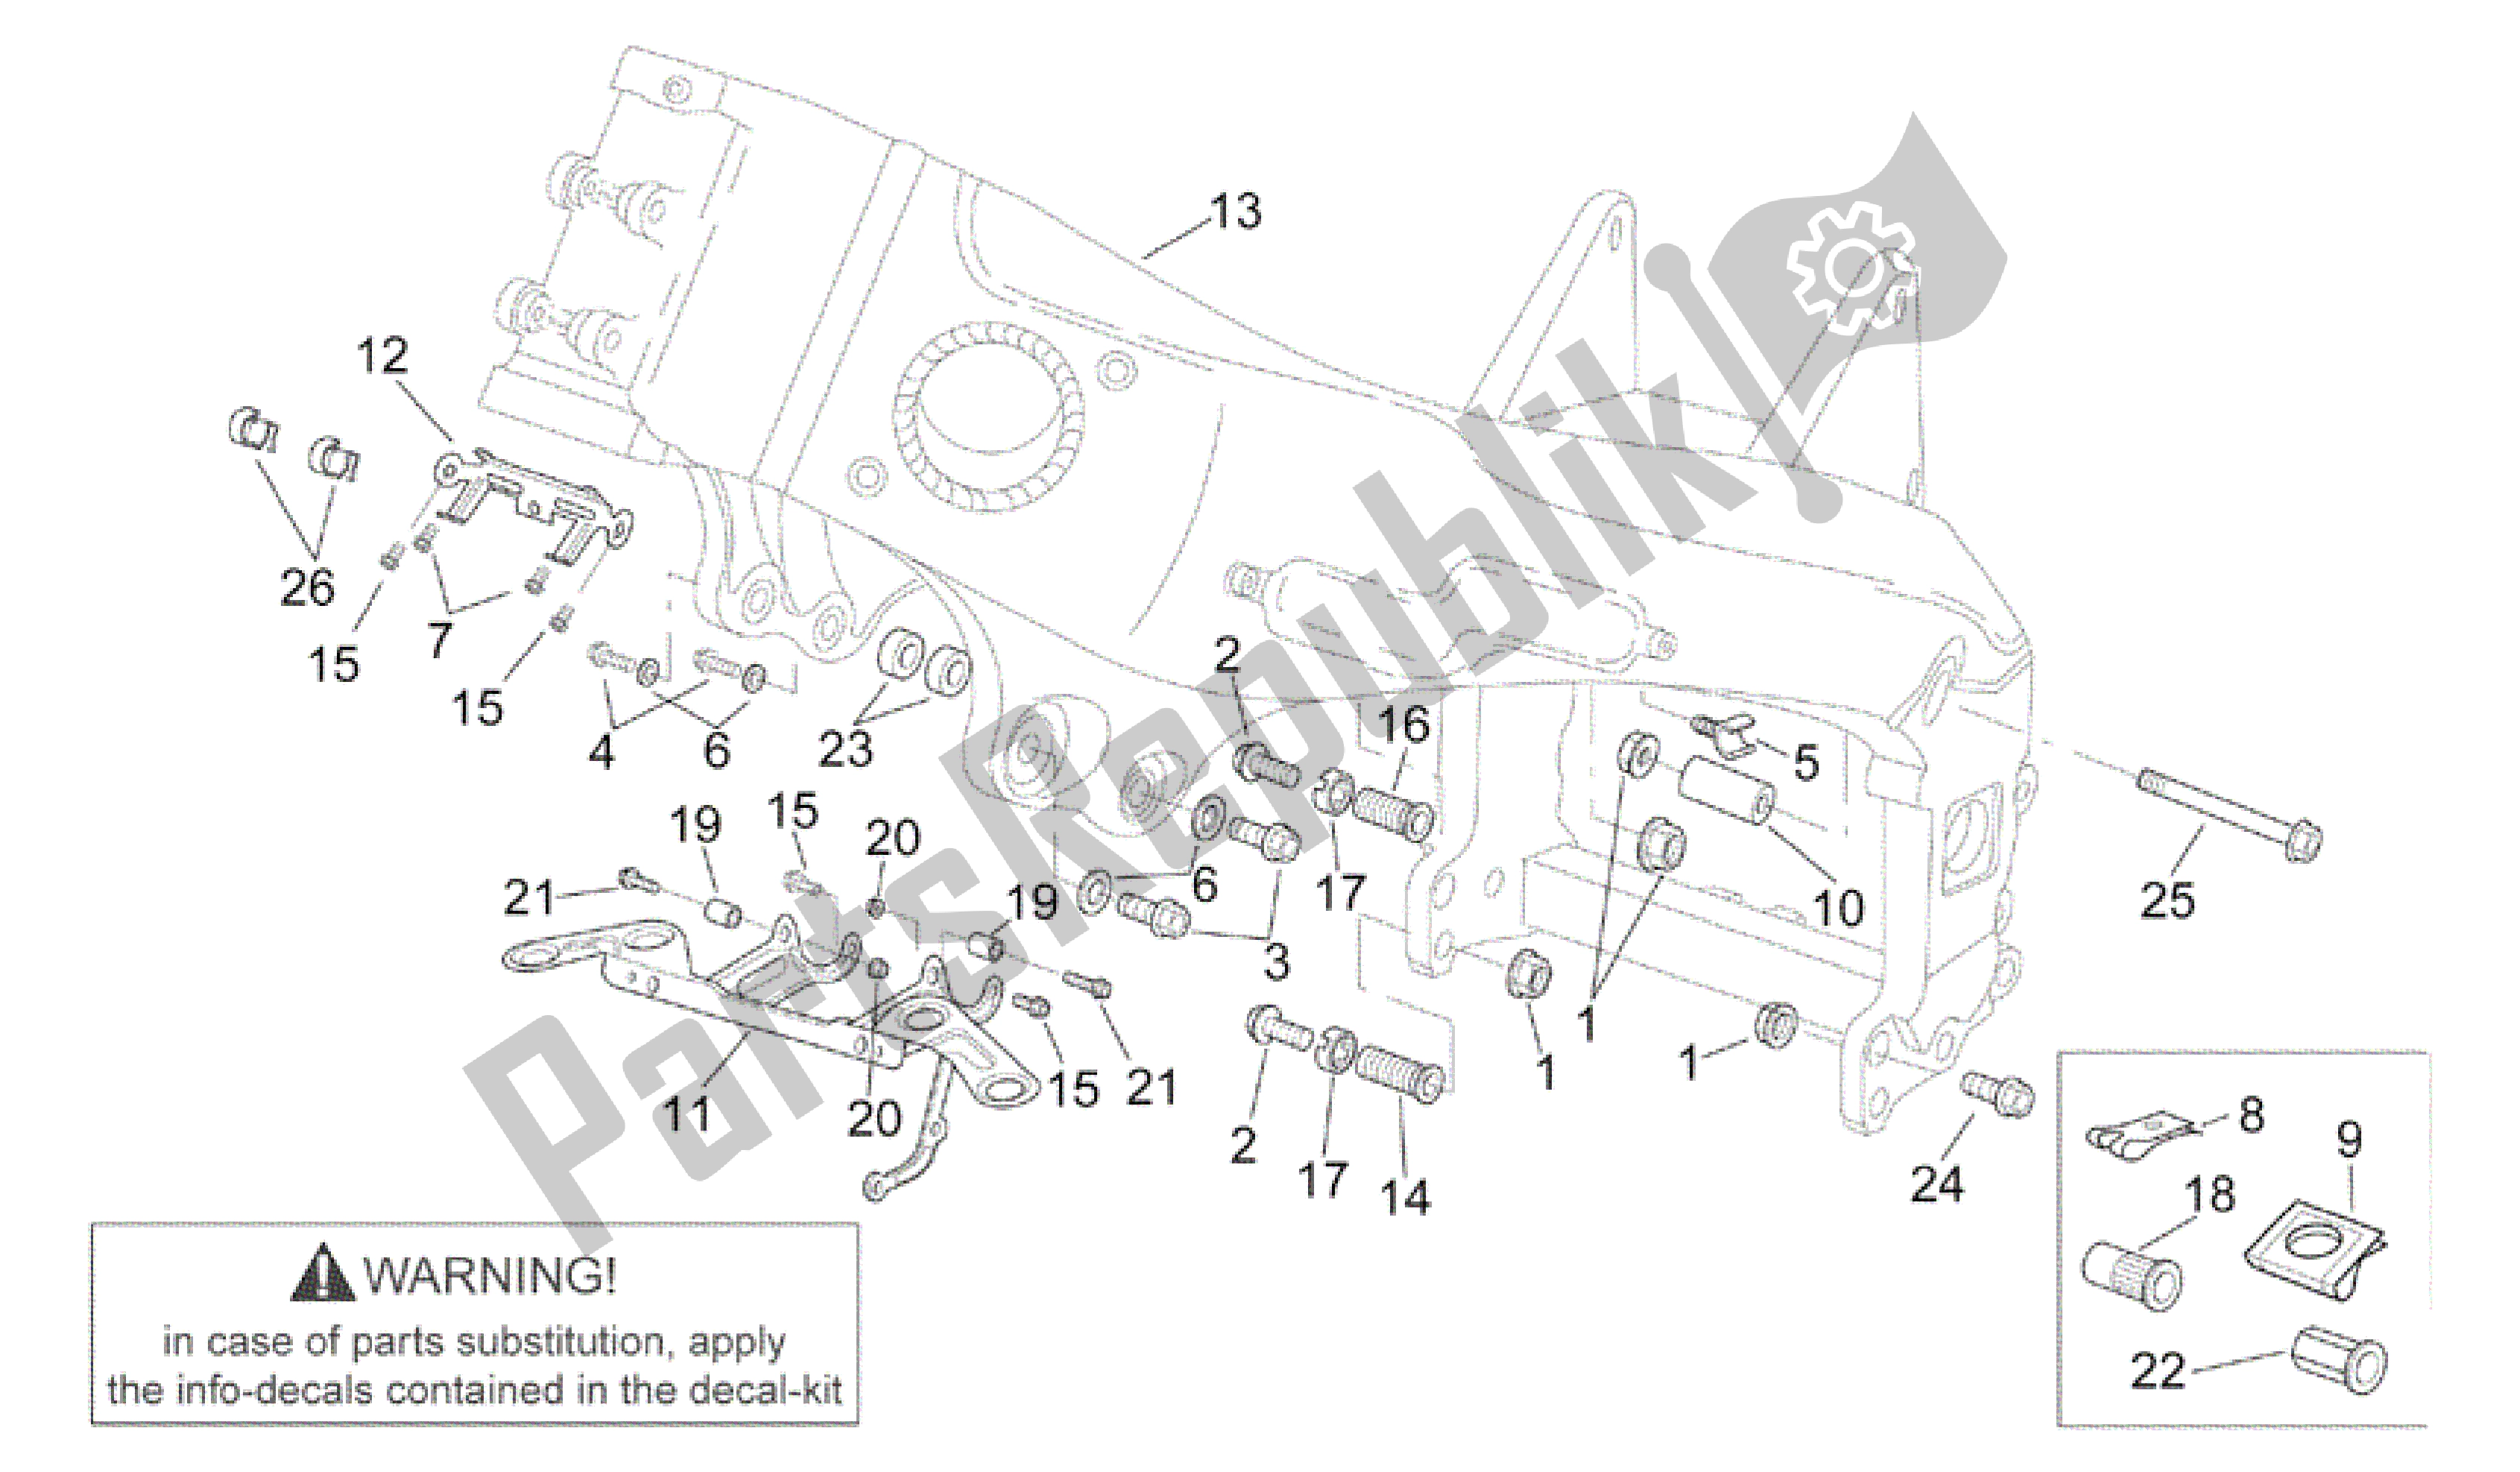 All parts for the Frame Iii of the Aprilia RSV Mille R GP1 Limited Edition 3963 1000 2003